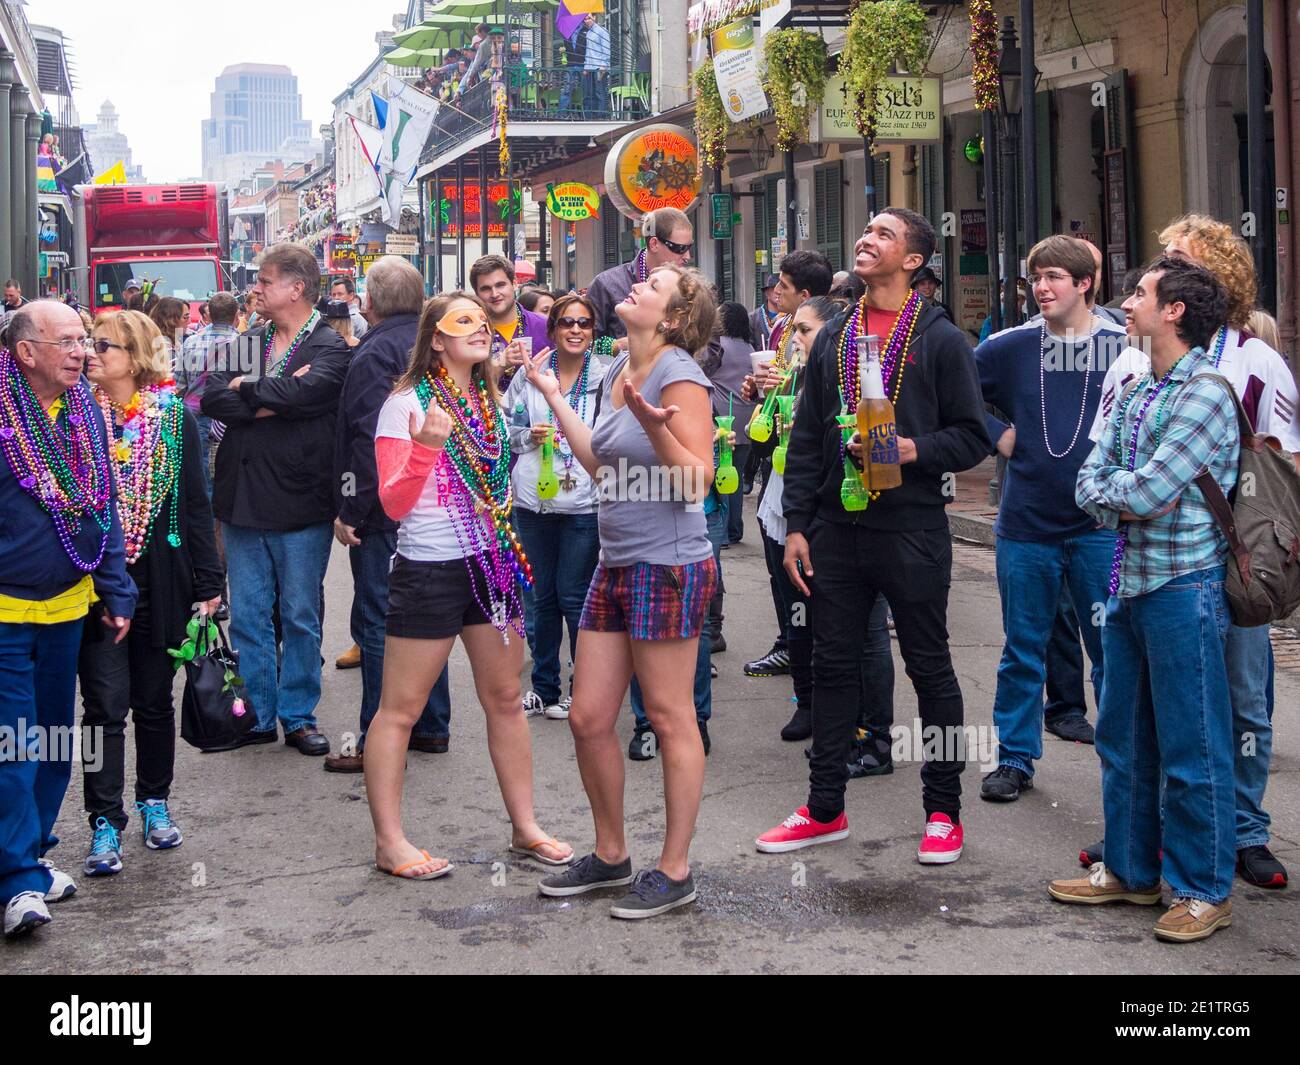 Trees on St. Charles St. Mardi Gras parade route with beads, New Orleans,  Louisiana Stock Photo - Alamy